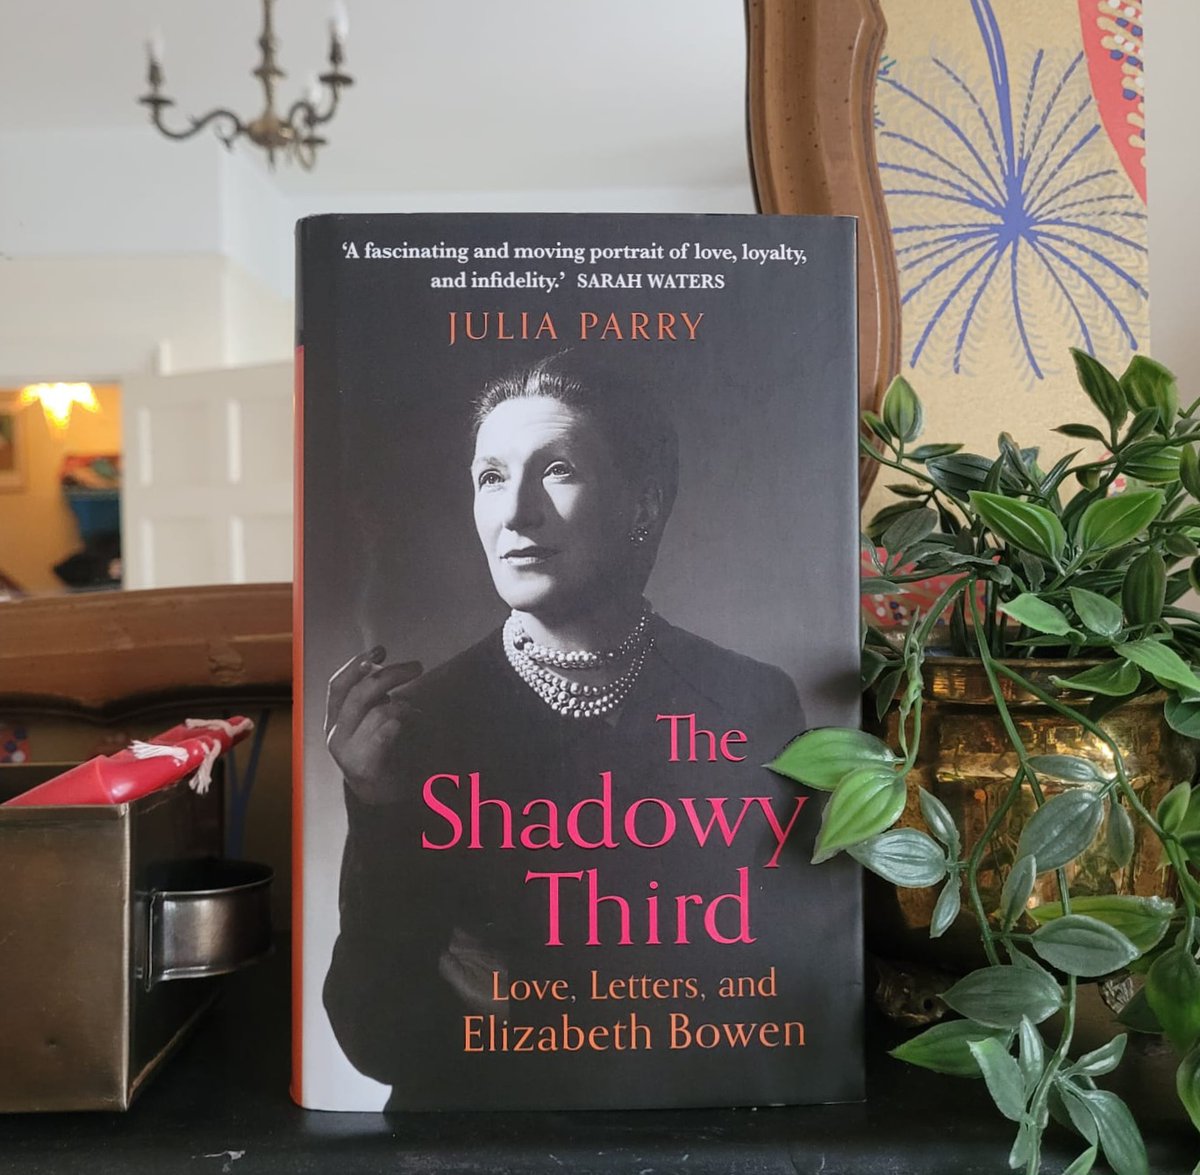 Our Reading Group had a lively discussion last night about Bowen's final full novel, Eva Trout. A juicy, elliptical, entrancing read. On the 31st July, 7pm BST, we'll discuss Julia Parry's *The Shadowy Third*. See, too, pinned post re. 7th June lecture w/ Eibhear Walshe.